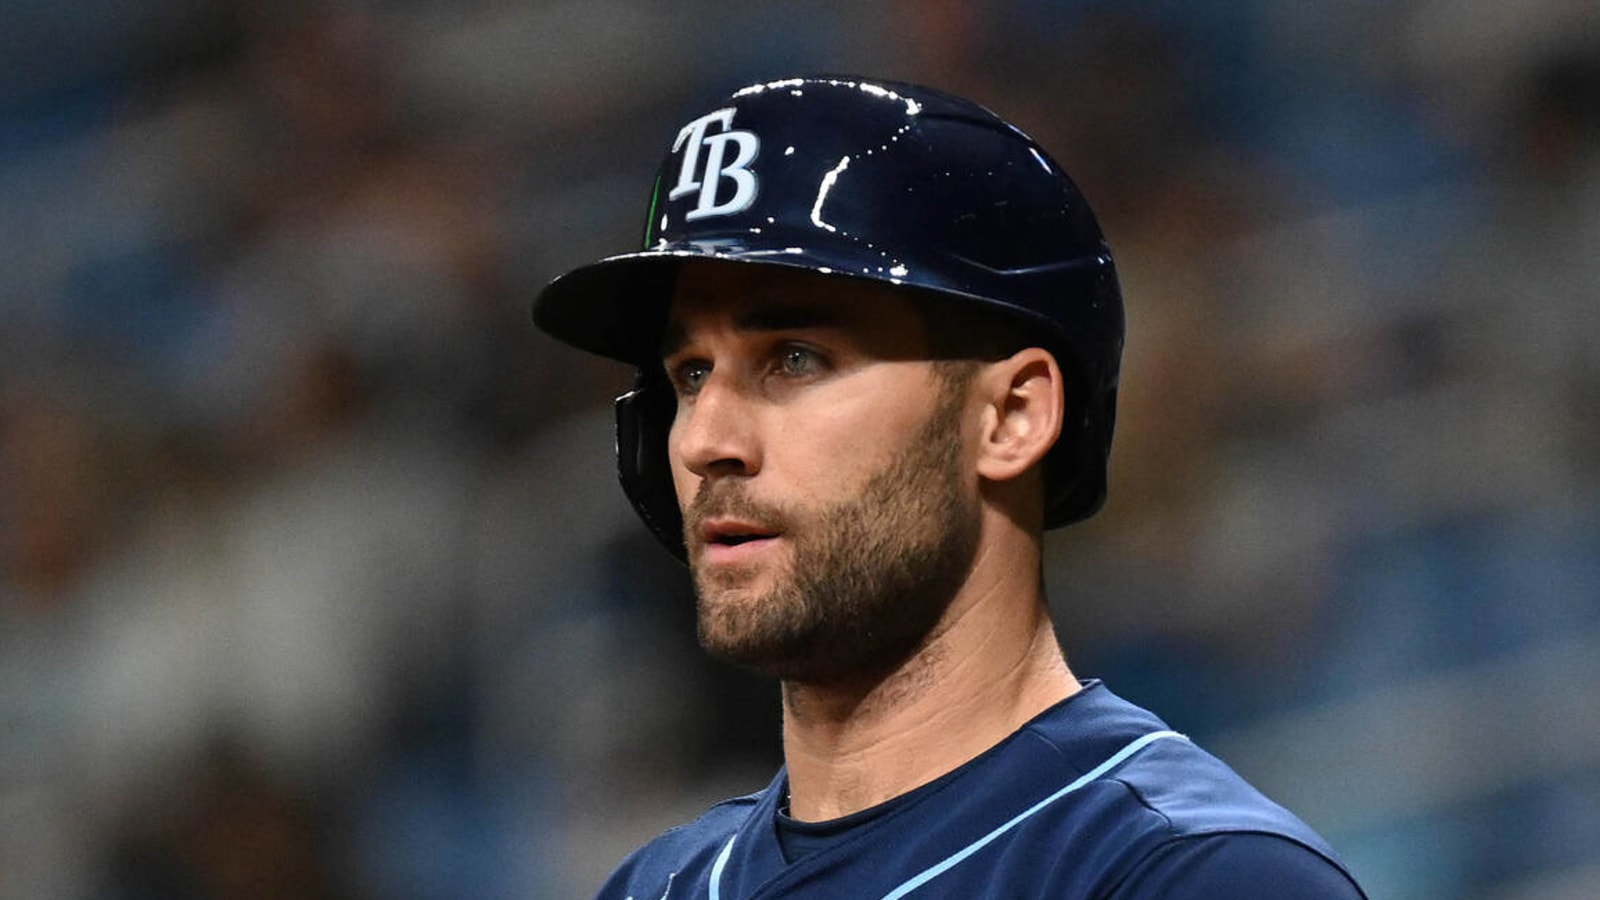 Kevin kiermaier playing on rays artificial turf is a big issue